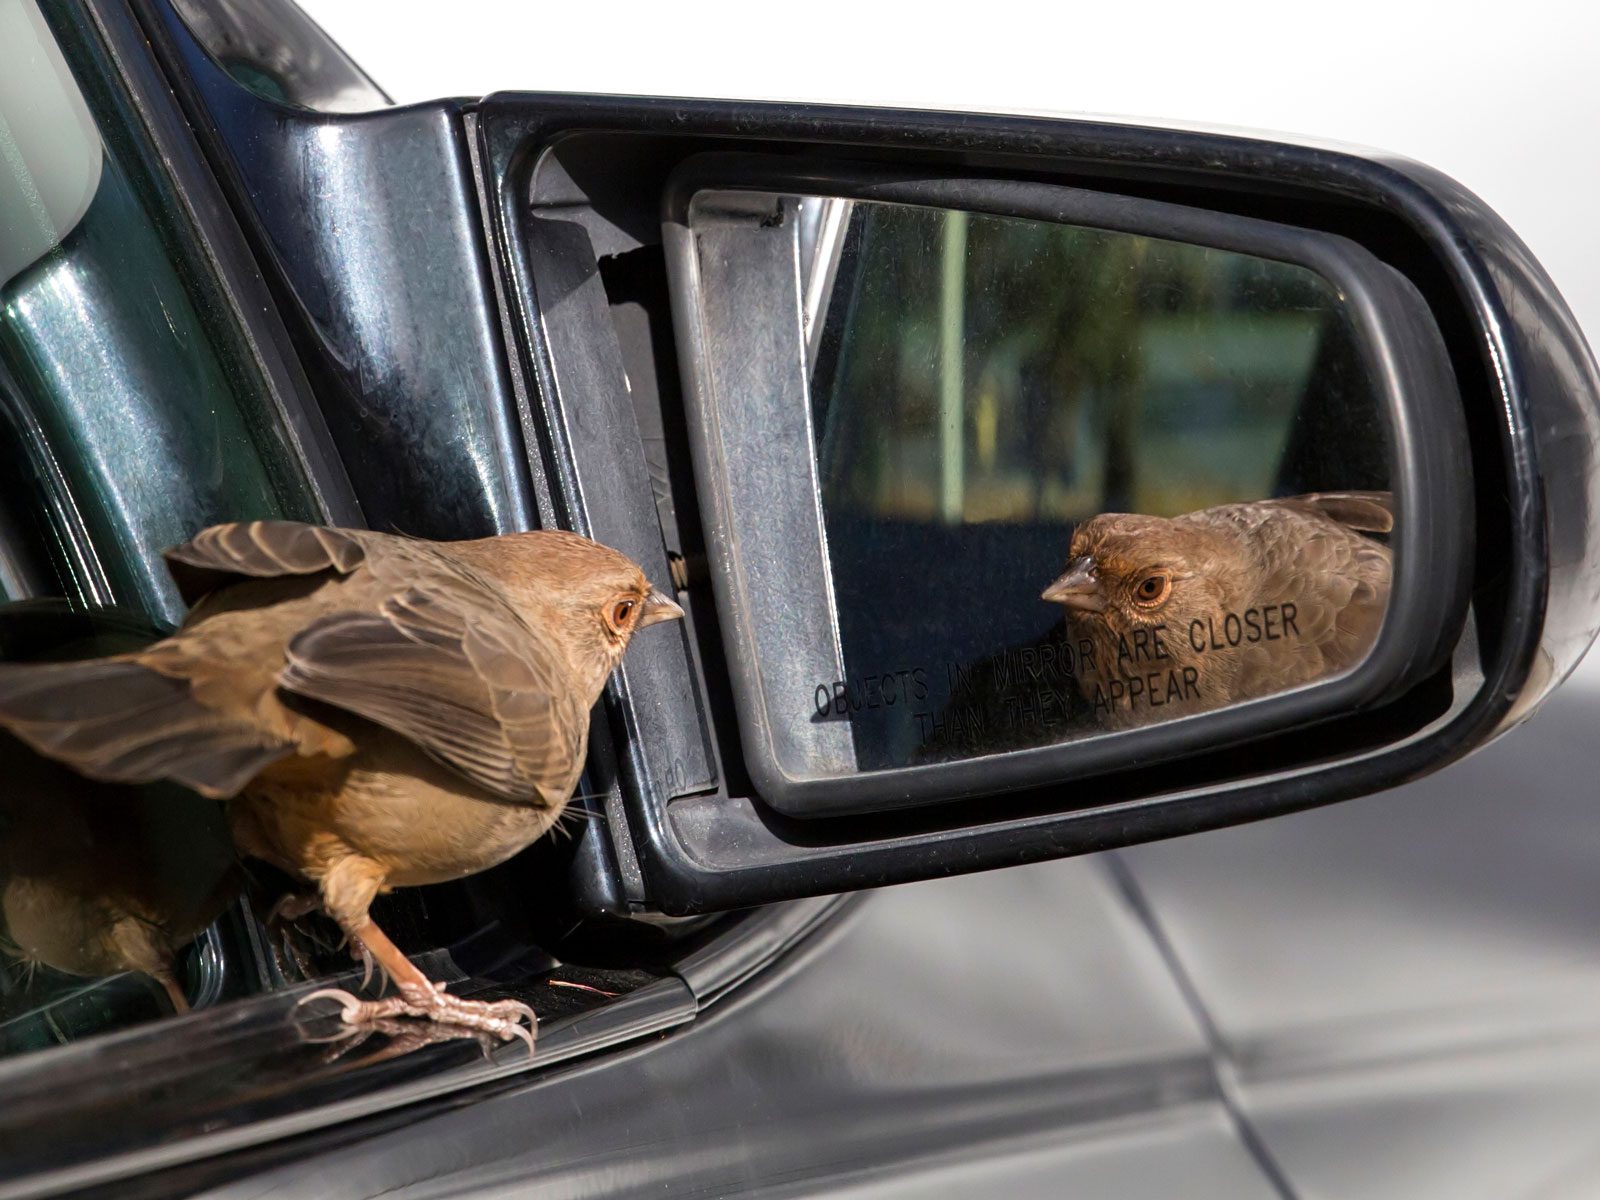 A bird keeps flying into my window or car mirror, on purpose. What should I  do?